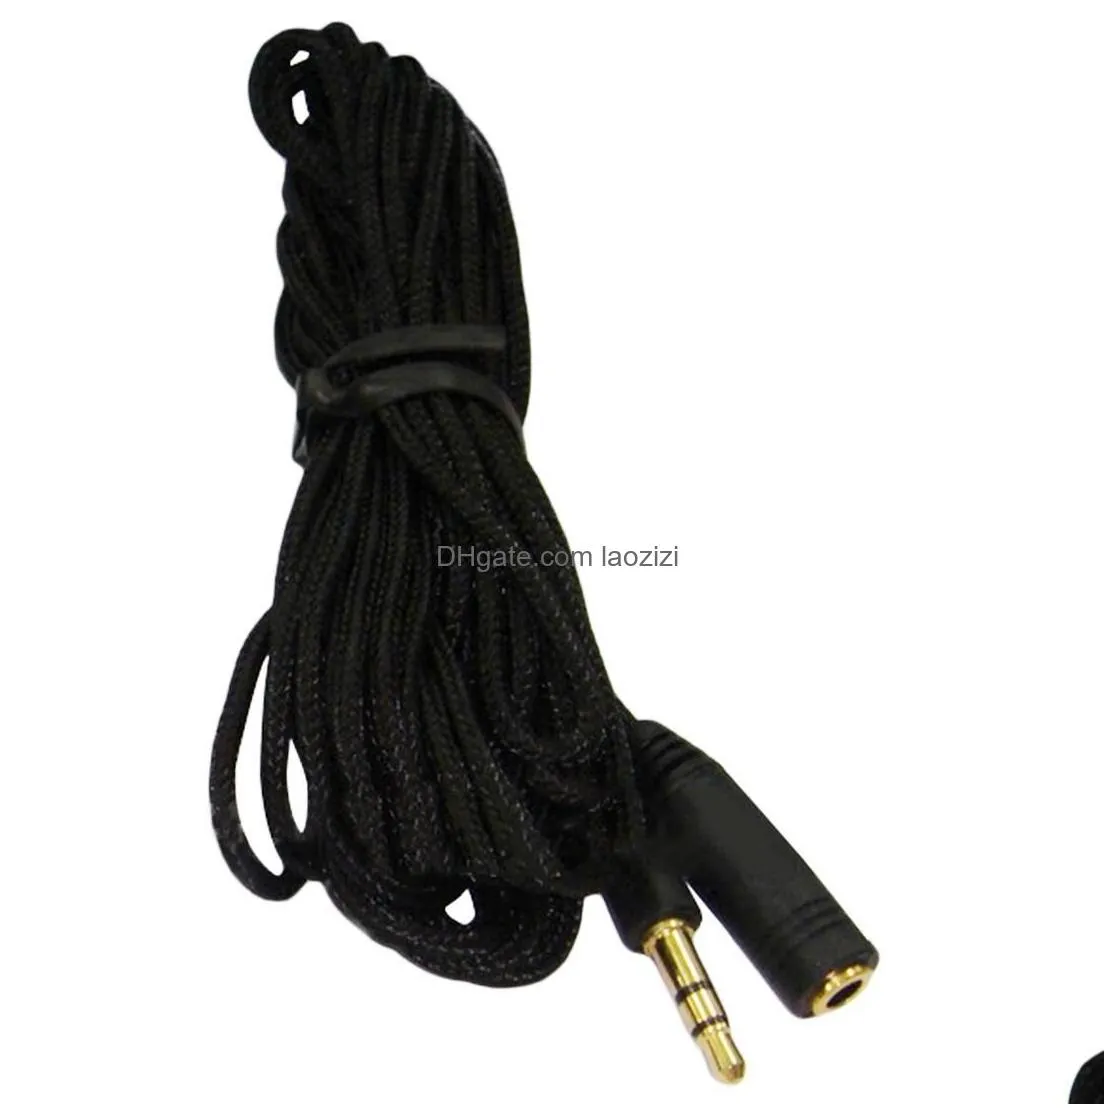 3.5mm stereo audio earphone extension cable 5m//1.5m ultra long for headphone computer cellphone mp3/4